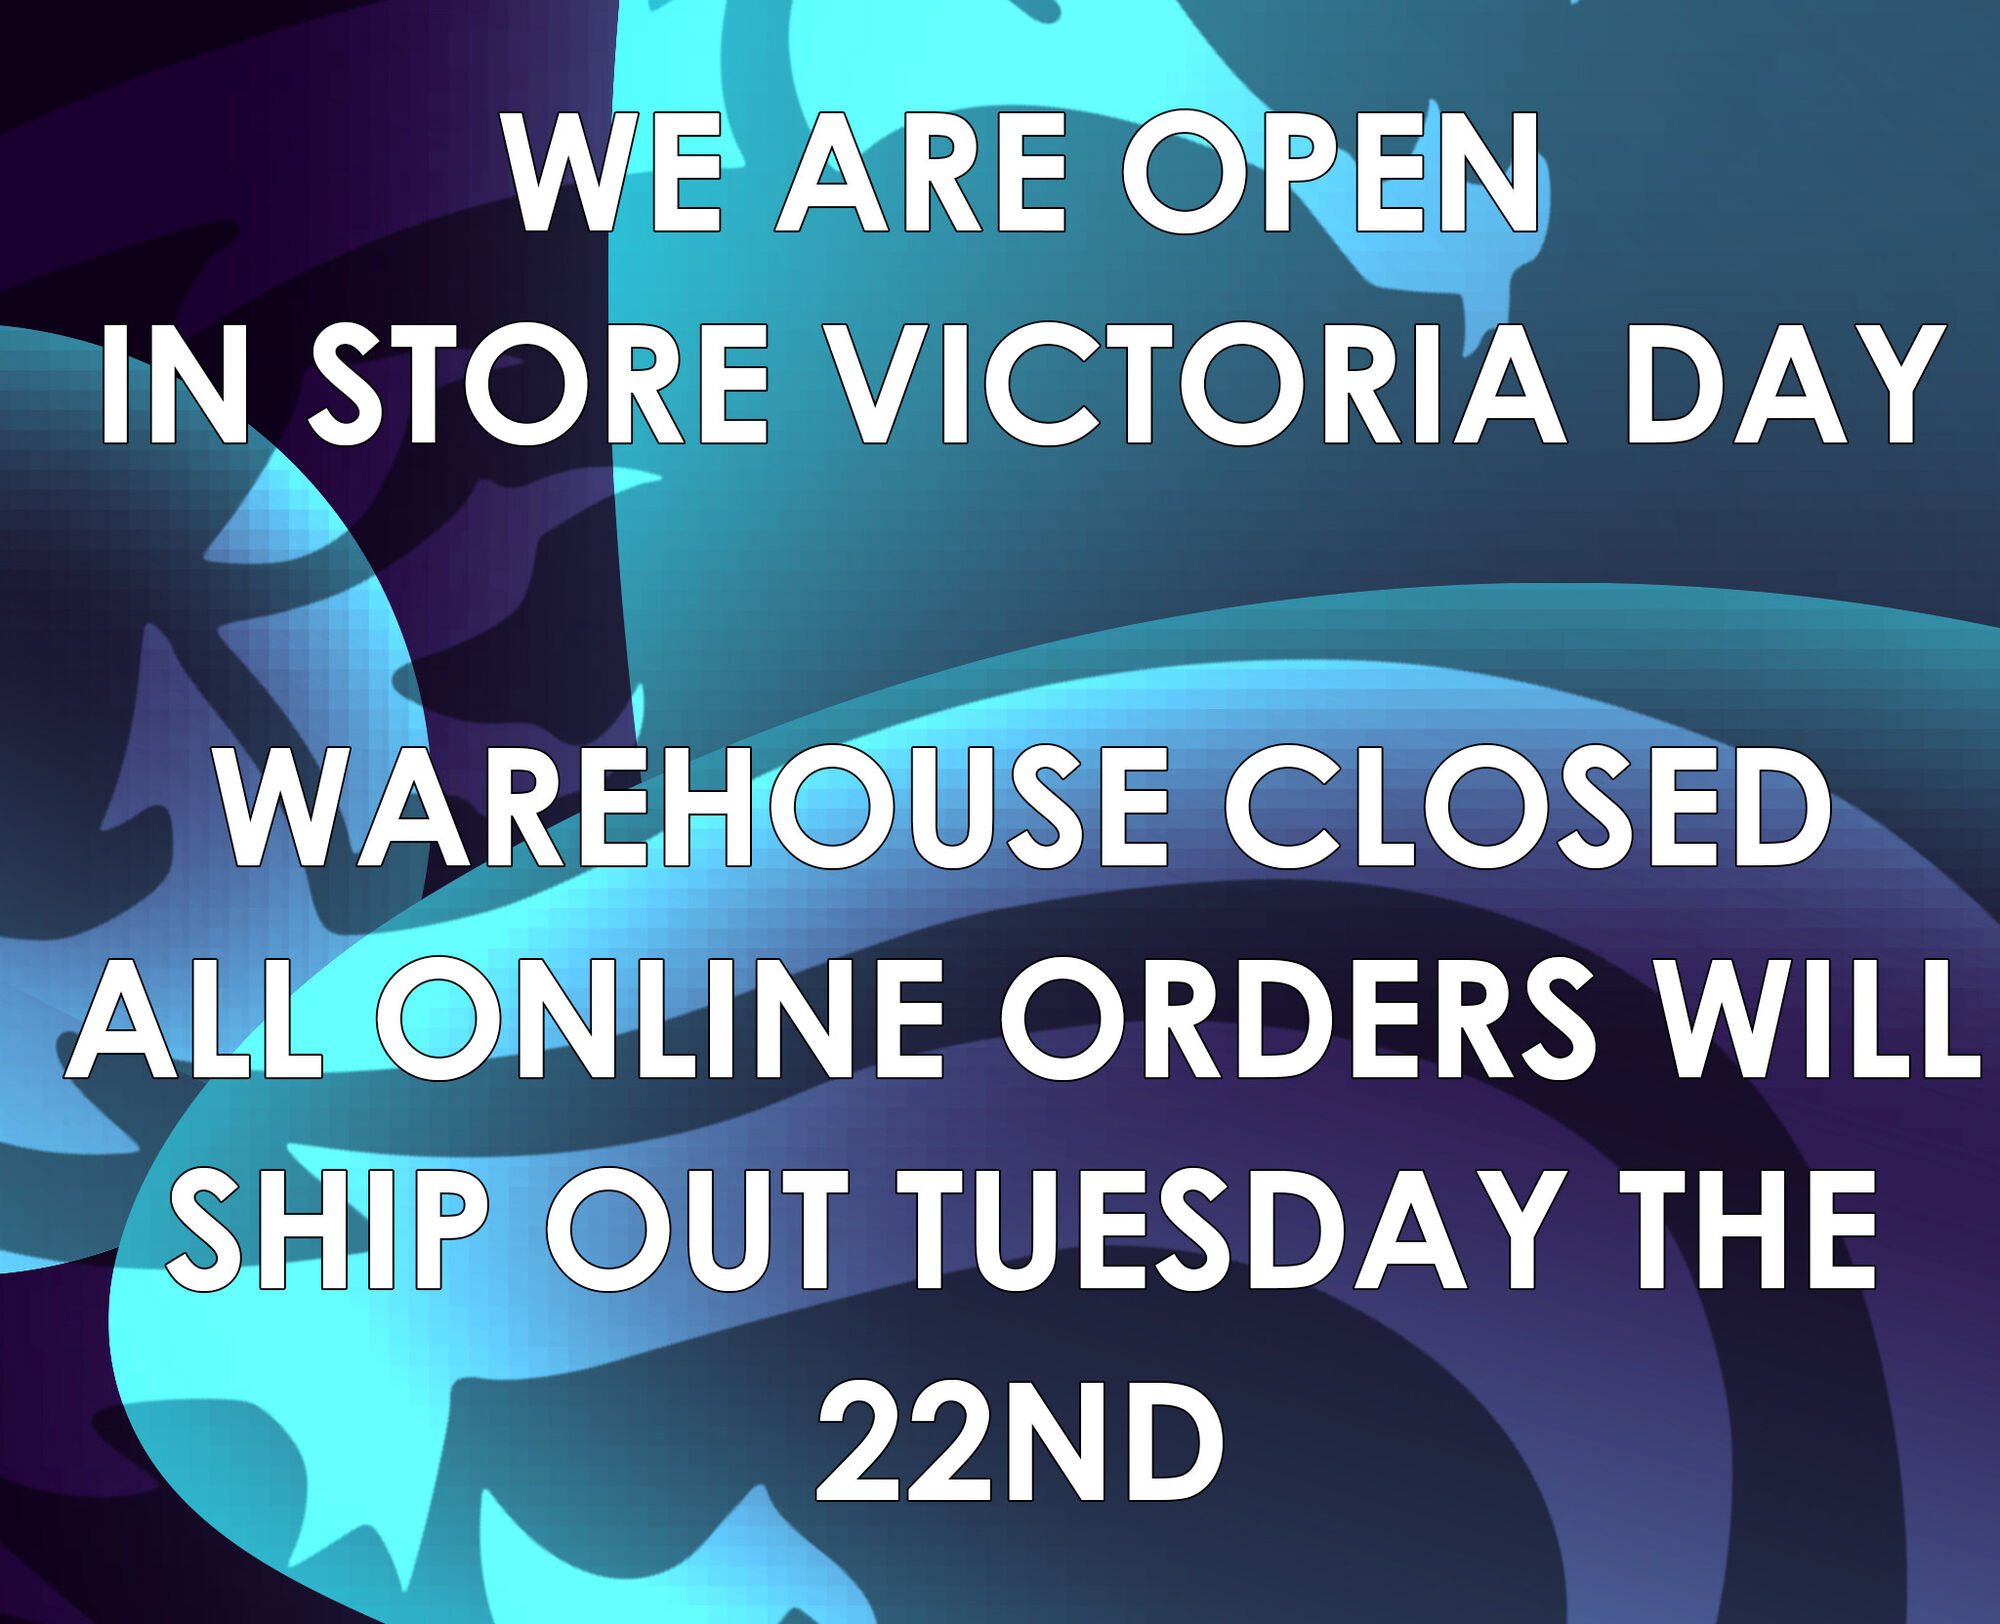 WE ARE OREN IN STORE VICTORIA DAY WAREHOUSE CLOSED ALS@NLINE ORDERS WILL SHIRFOUT TUESDAY THE 22ND 